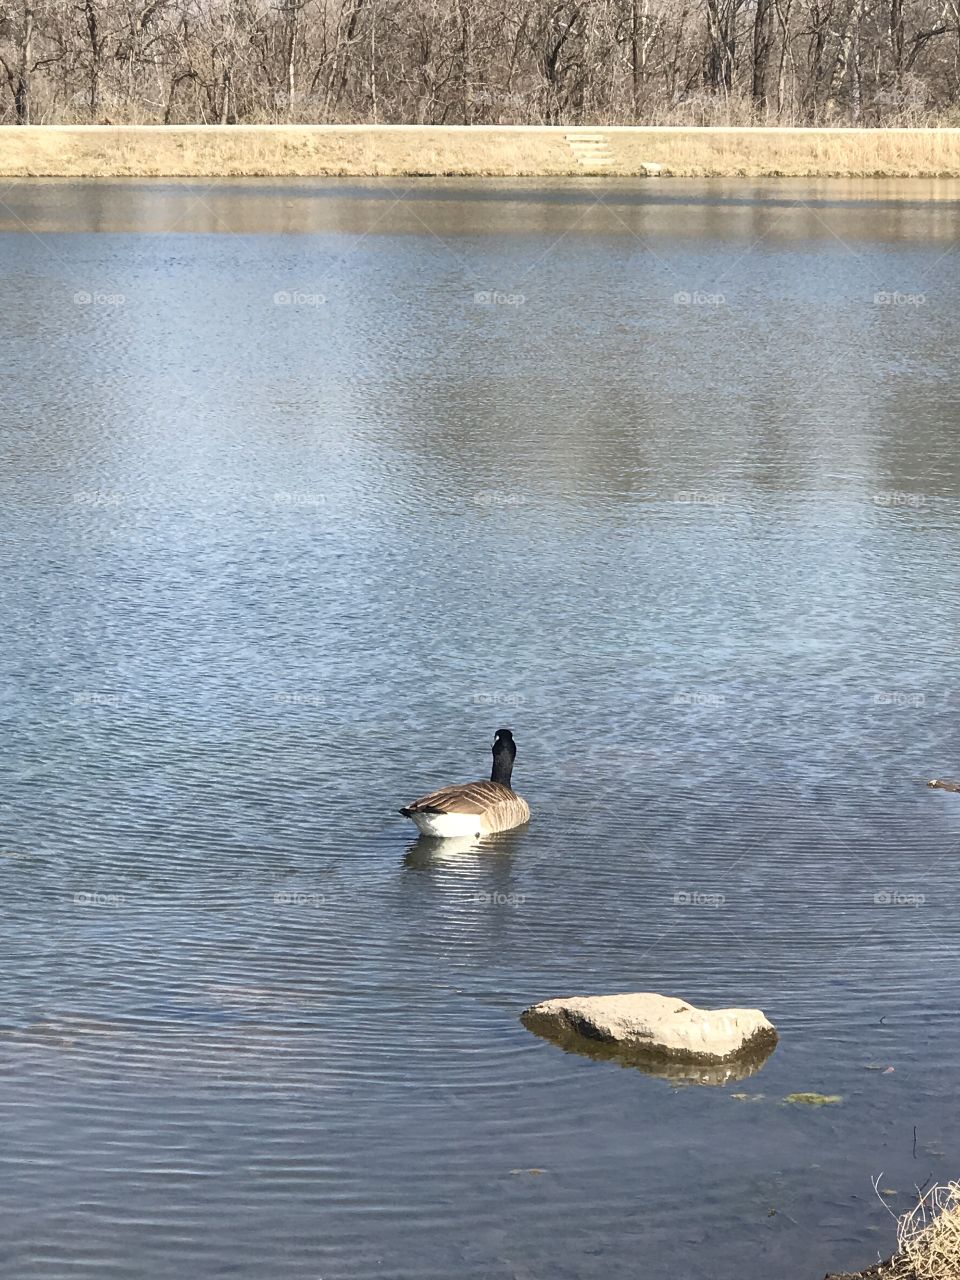 This goose travels alone